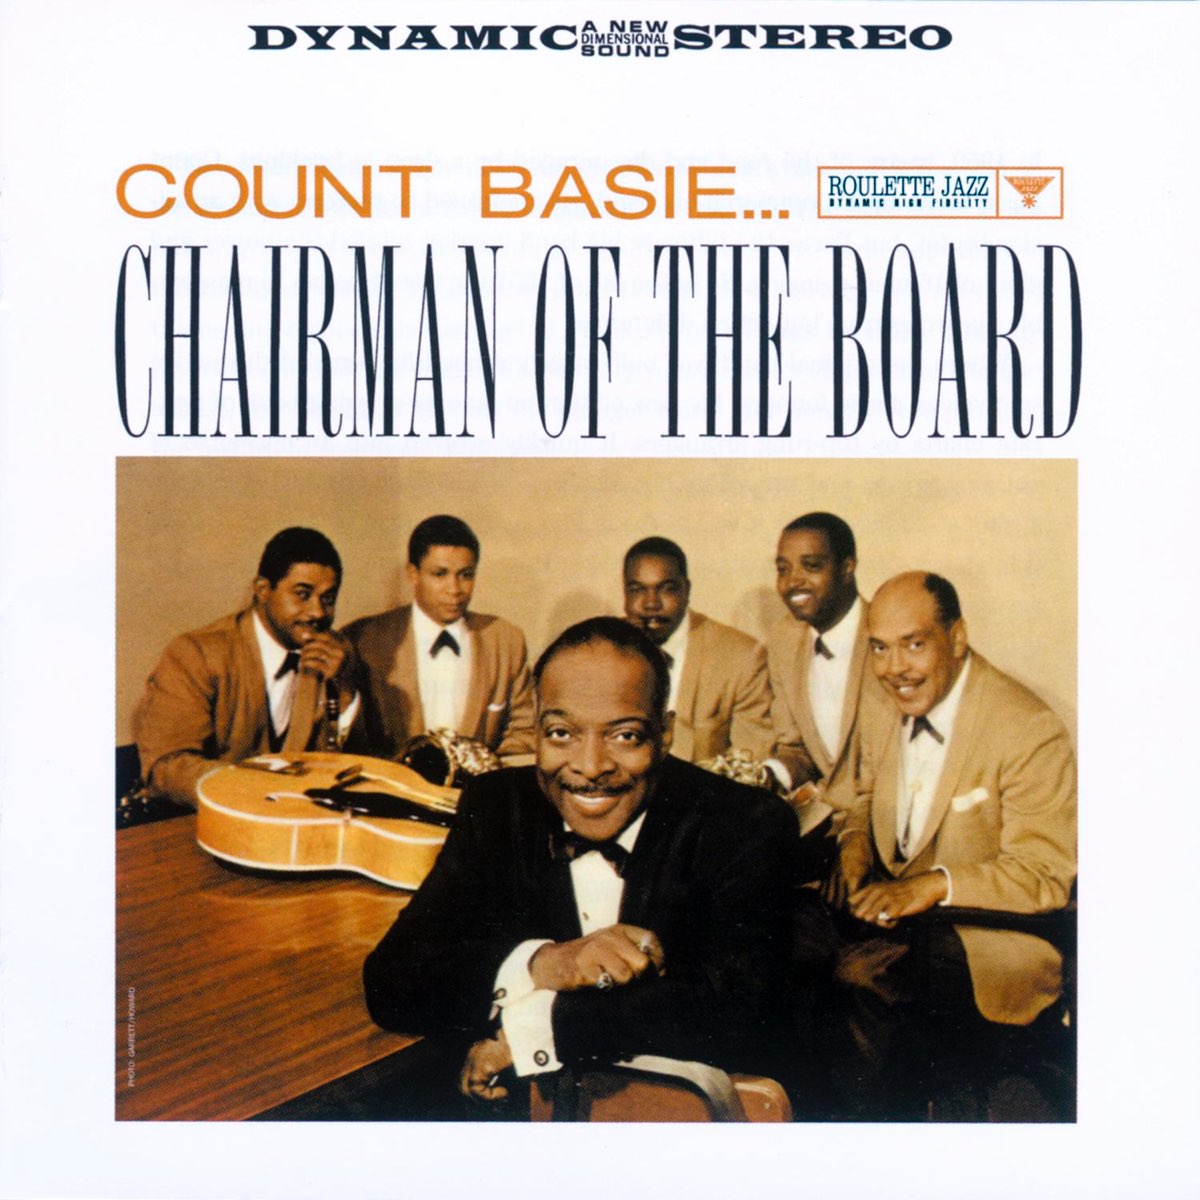 Chairman of the Board by Count Basie on Apple Music